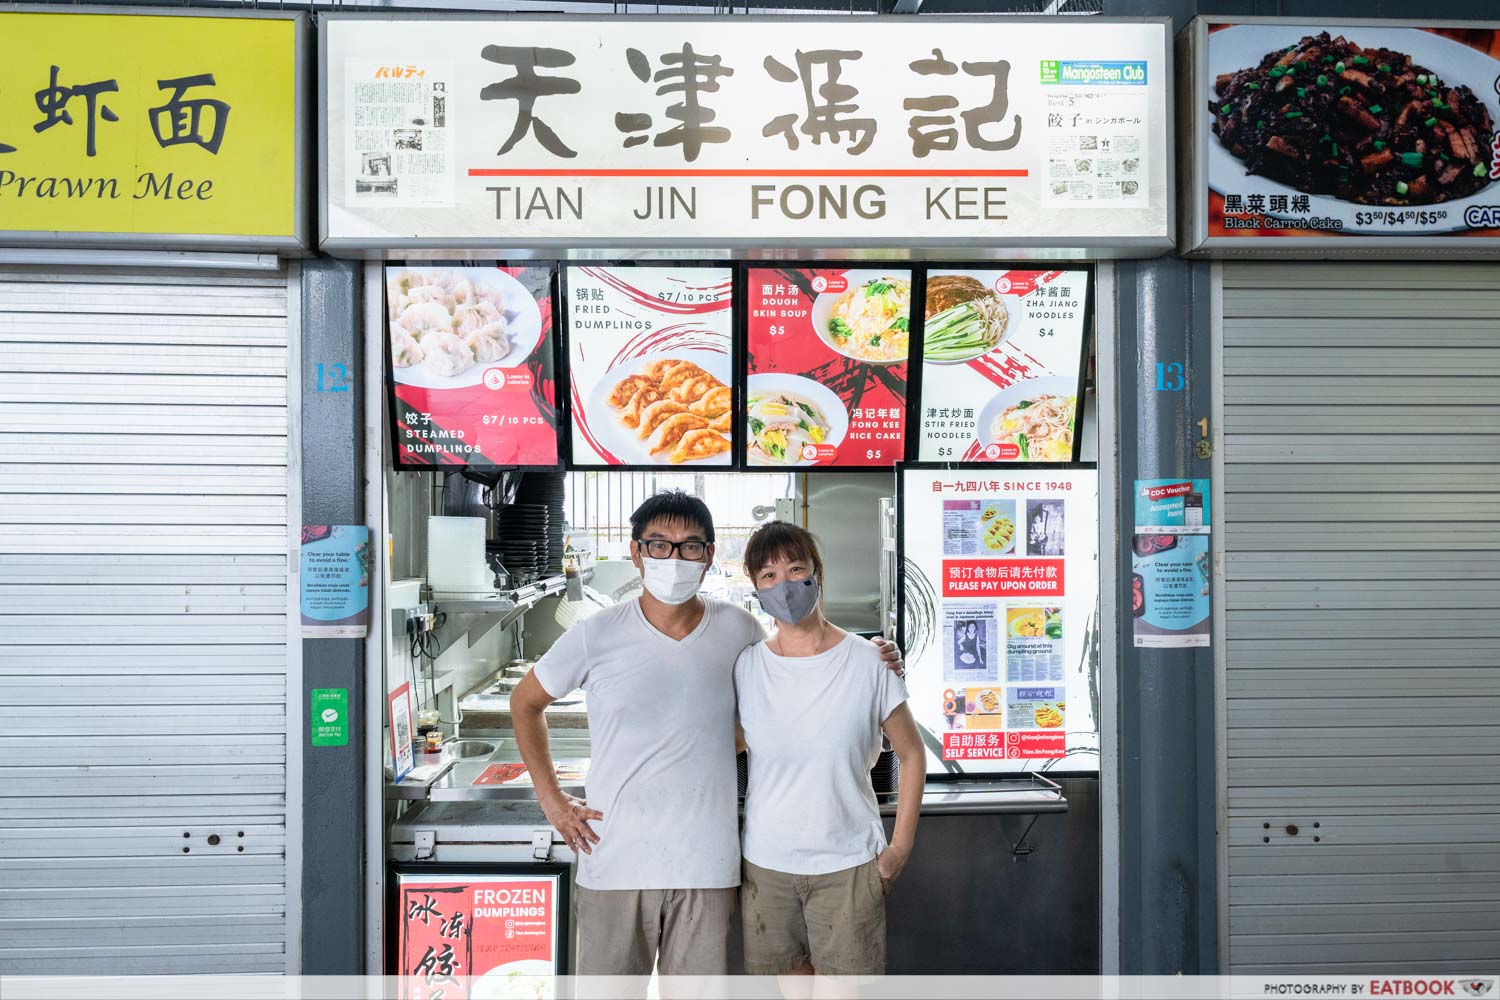 tian jin fong kee - storefront with owners